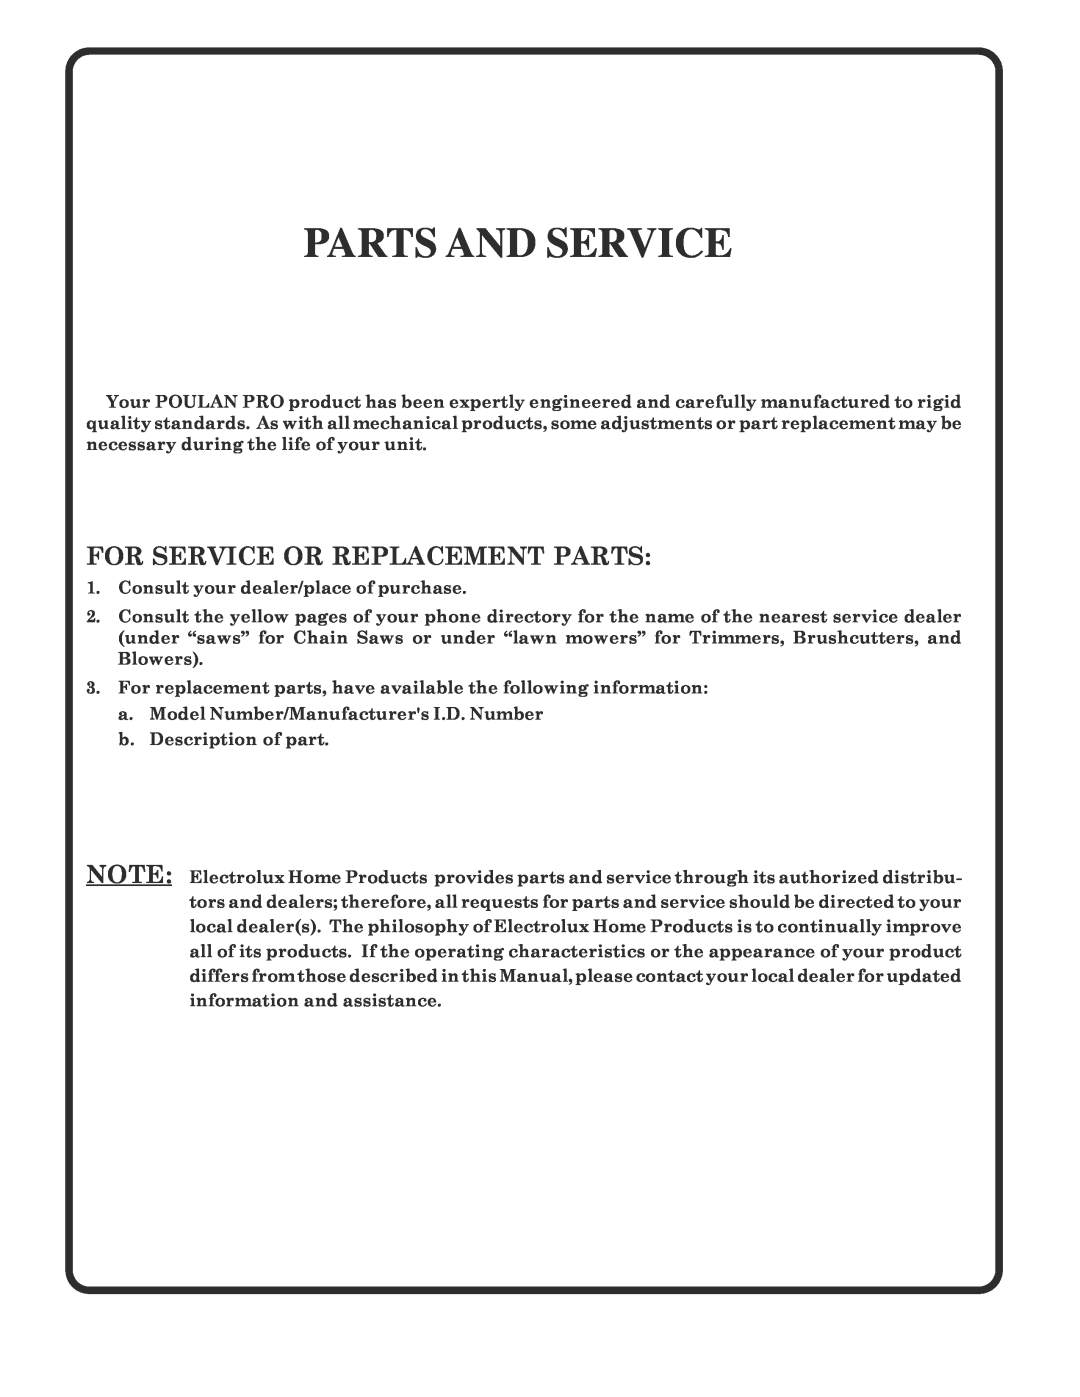 Poulan PR17H42STF owner manual Parts And Service, For Service Or Replacement Parts 